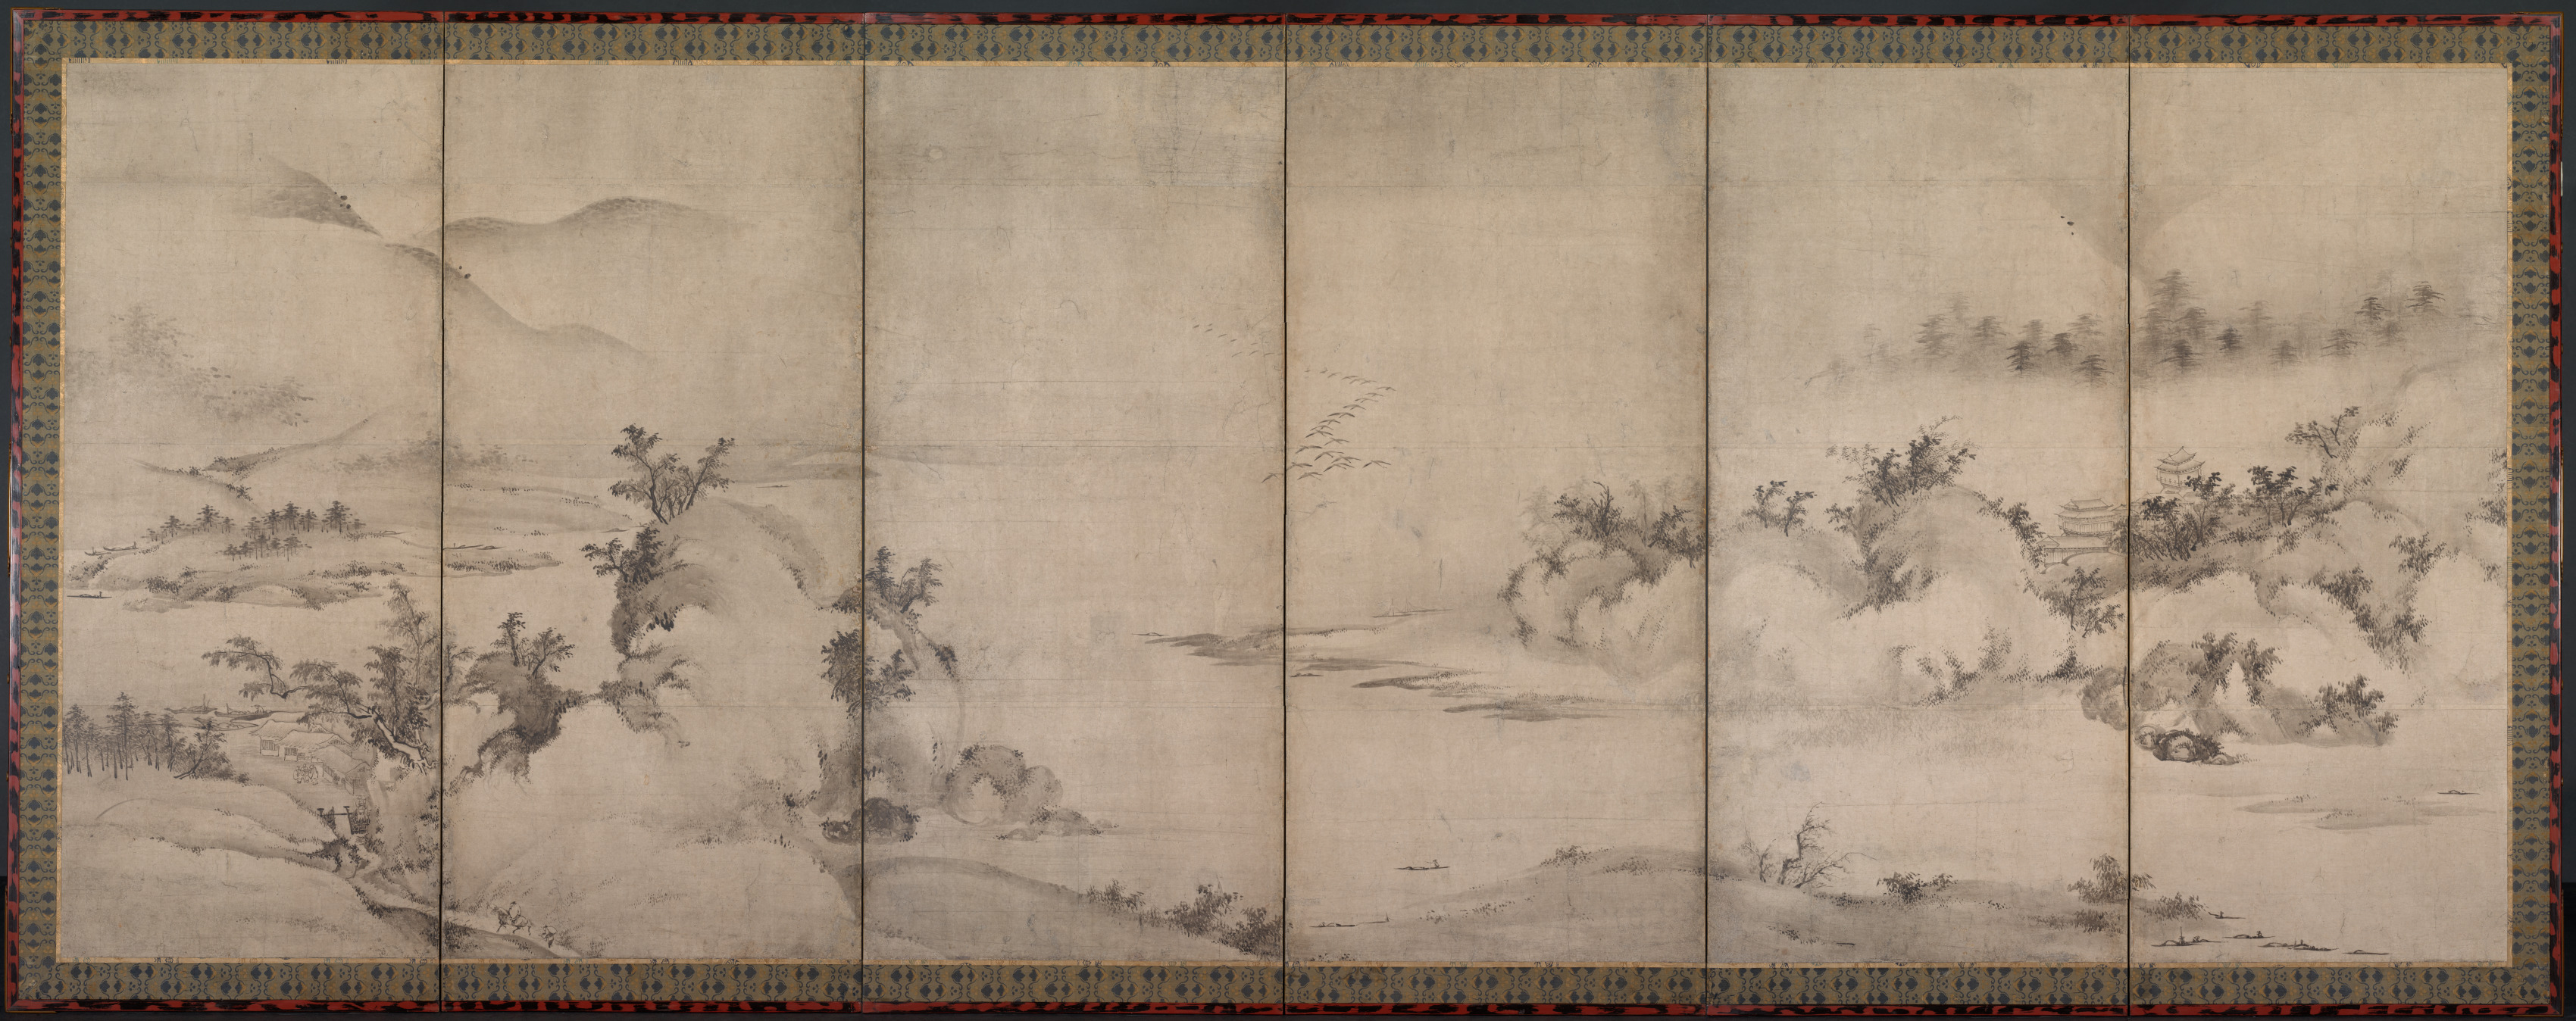 Landscape with Motifs from the Eight Views of Xiao-Xiang